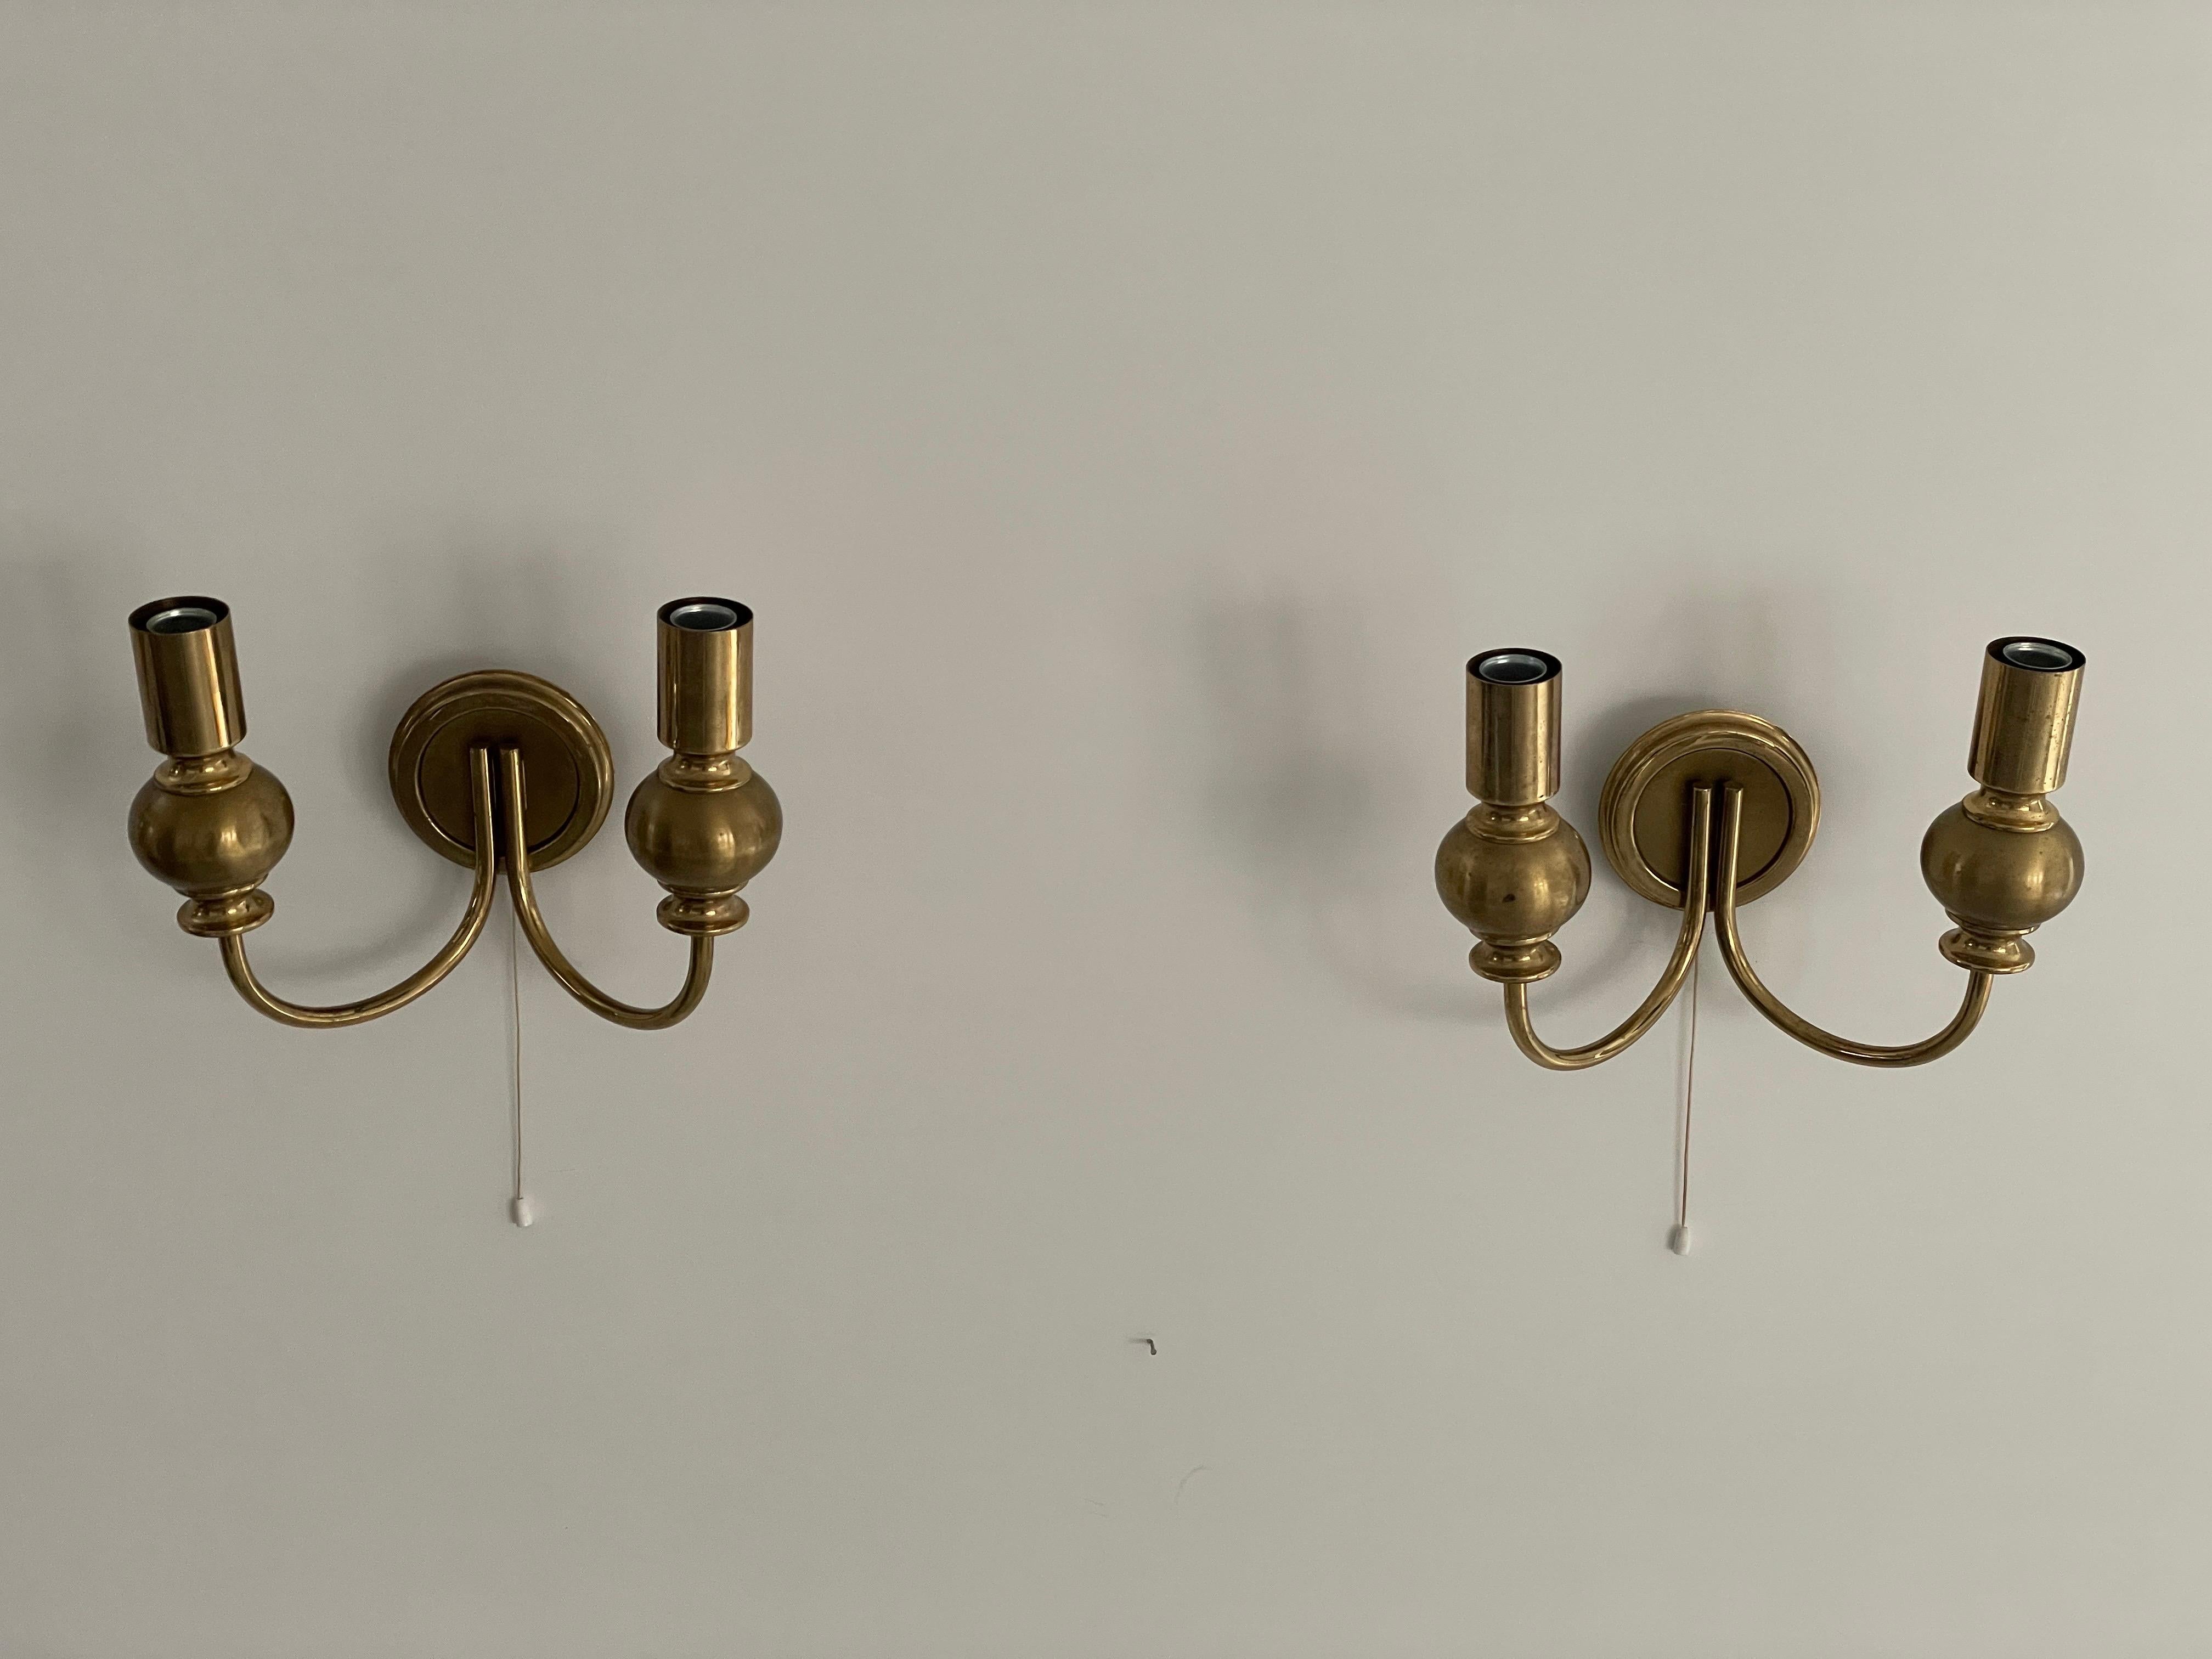 Atomic Design Brass Pair of Sconces by N Leuchten, 1950s, Germany

Lampshade is in very good vintage condition.

This lamp works with  2x E14 light bulbs. 
Wired and suitable to use with 220V and 110V for all countries.

Measurements:
Height: 20